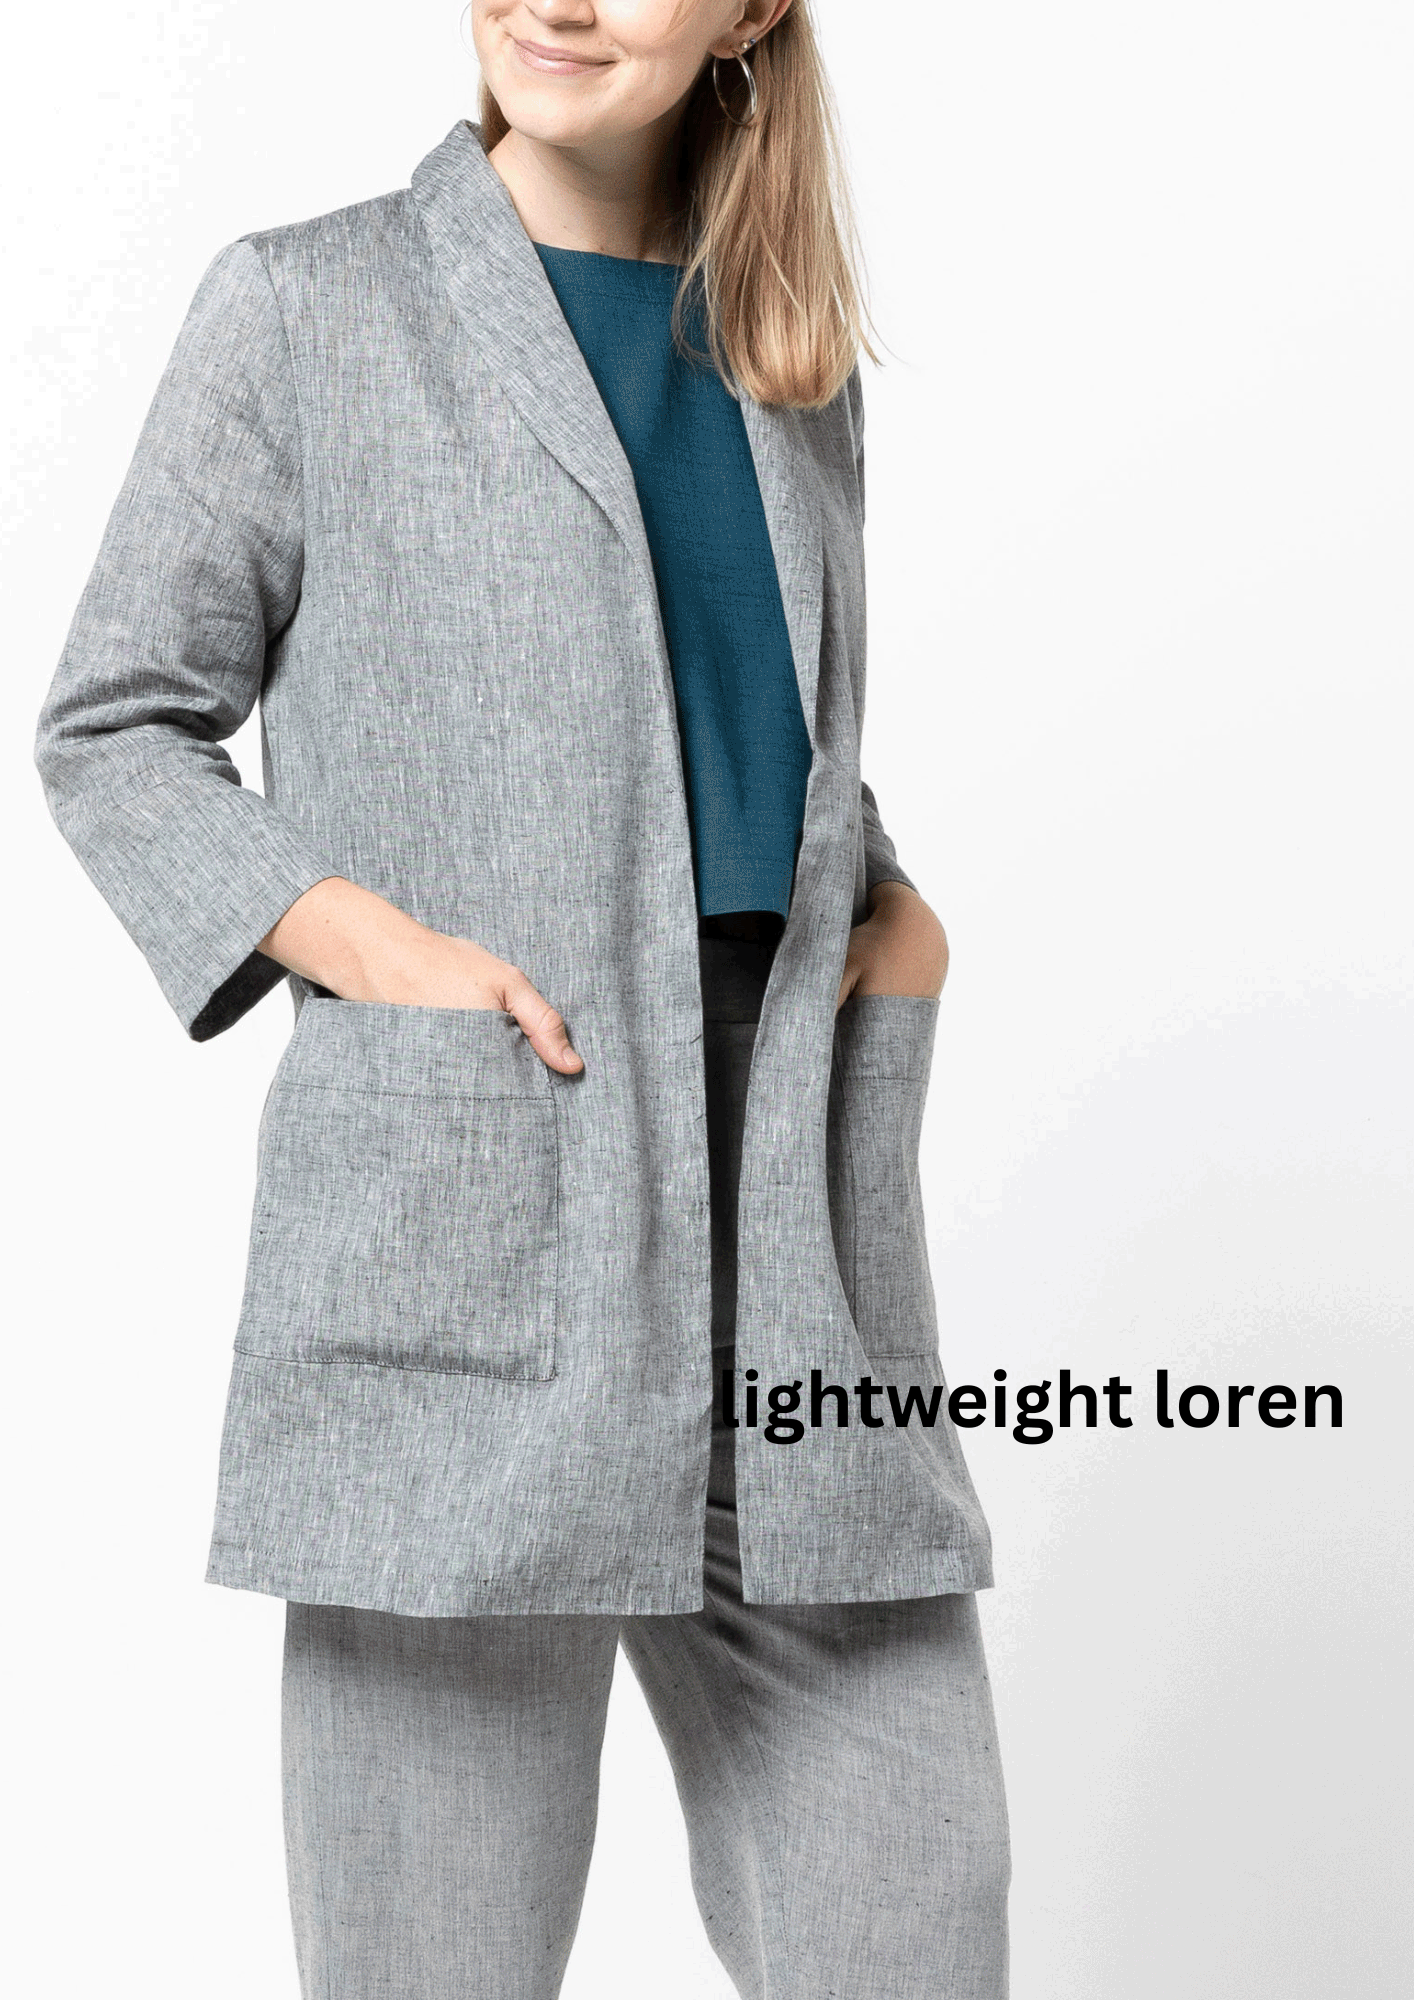 Sew many options with the Loren Jacket pattern